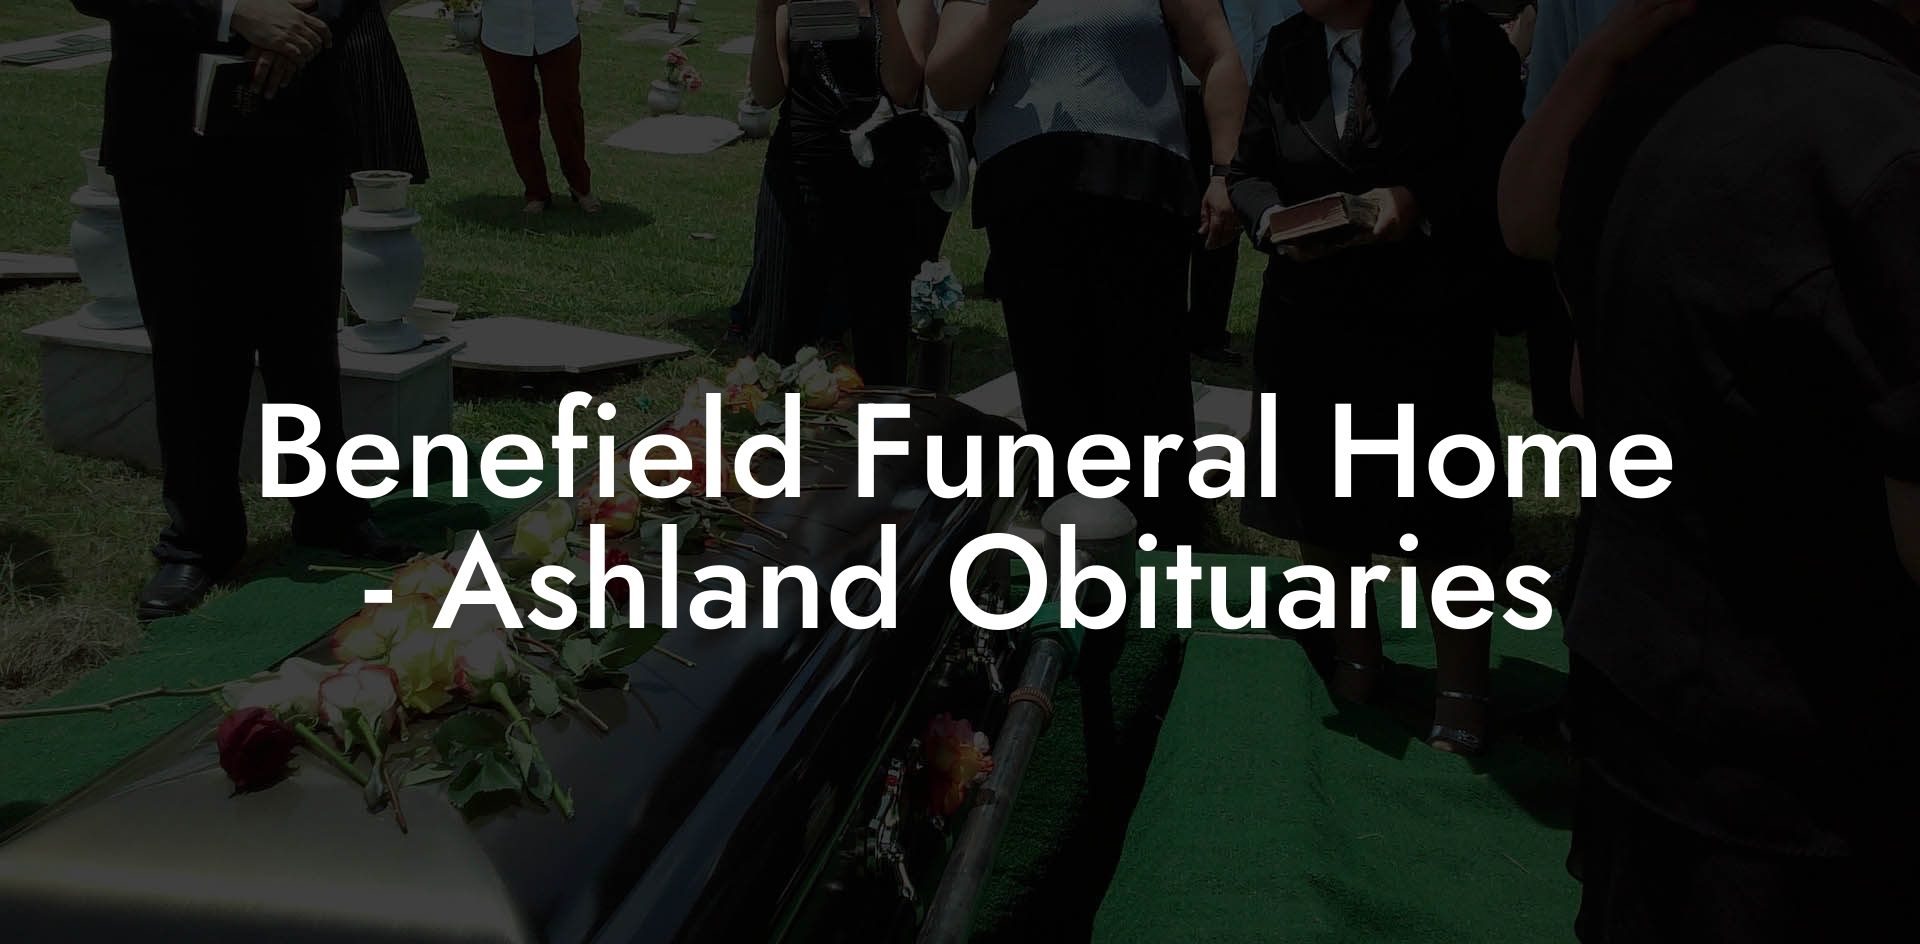 Benefield Funeral Home - Ashland Obituaries